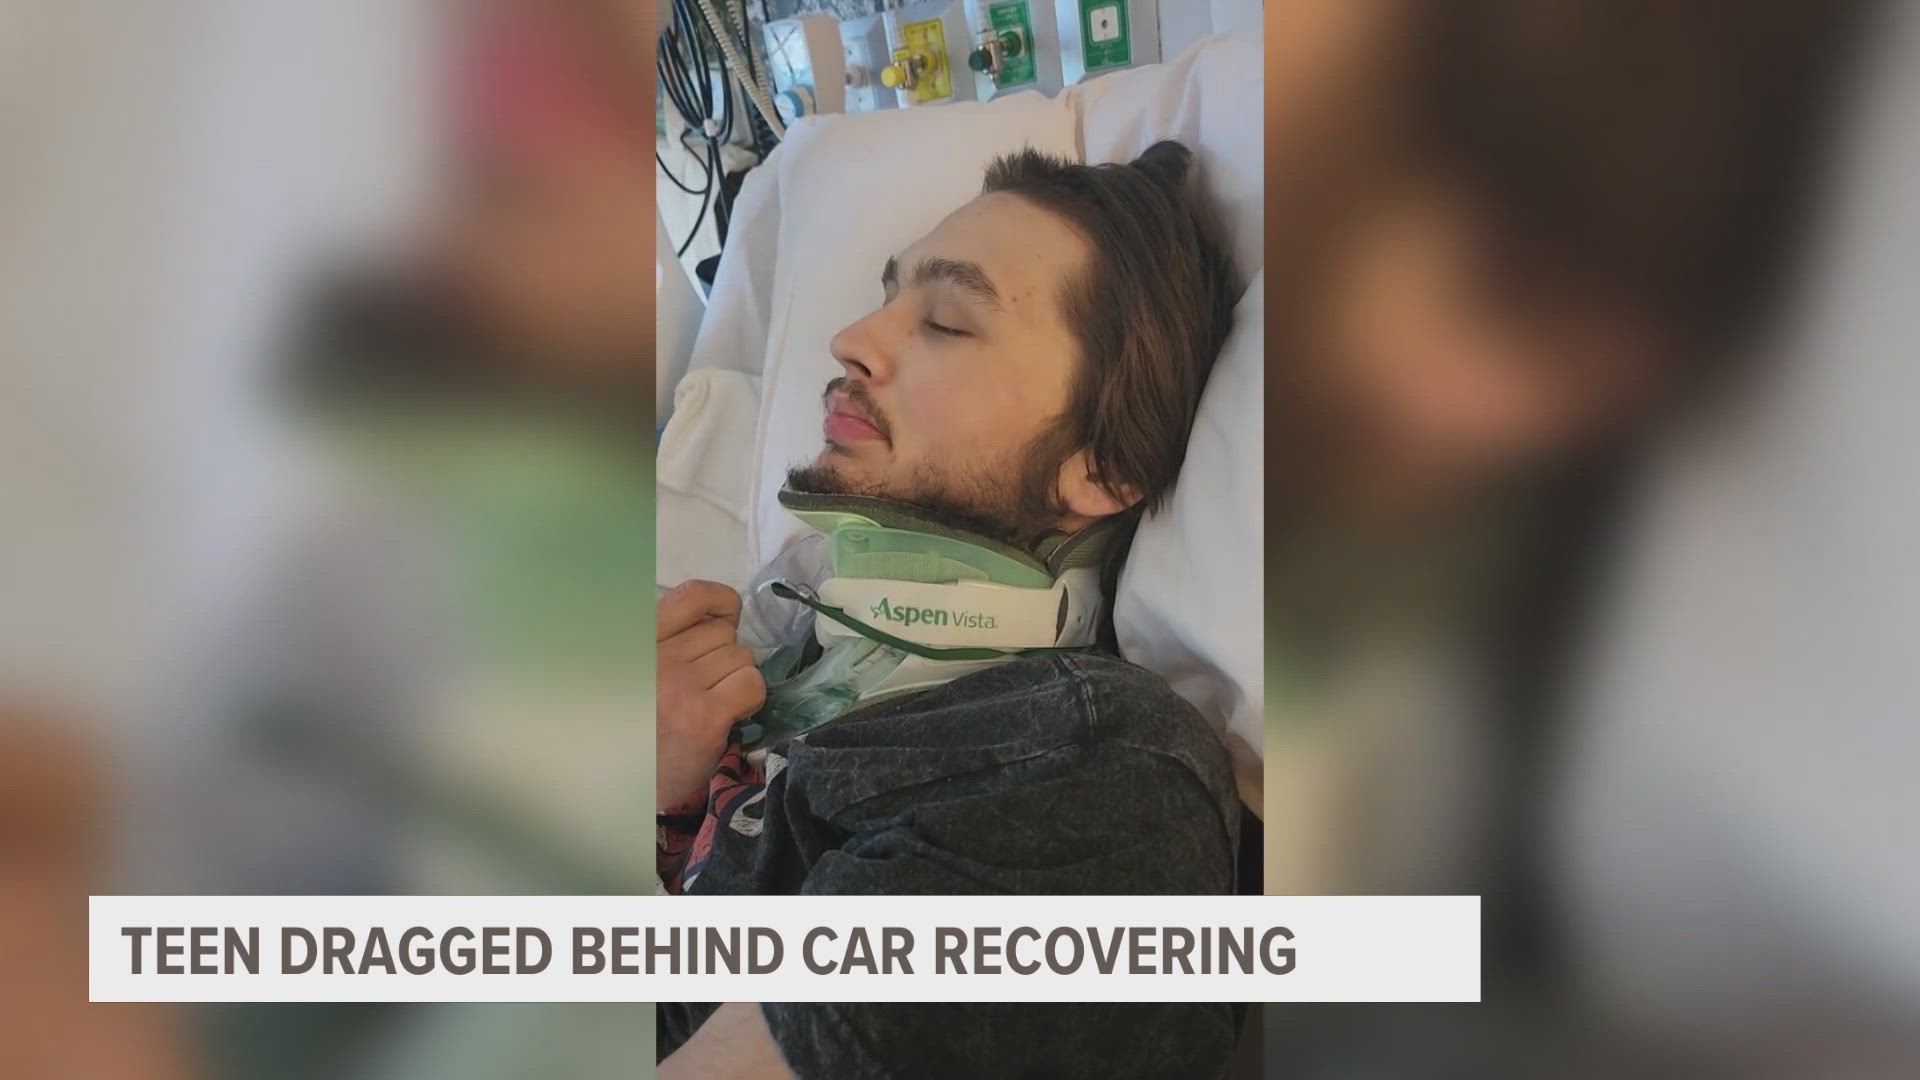 Colin Rogers was dragged behind a car and left on the side of the road in critical condition, allegedly over a dispute about the sale of a vape pen.